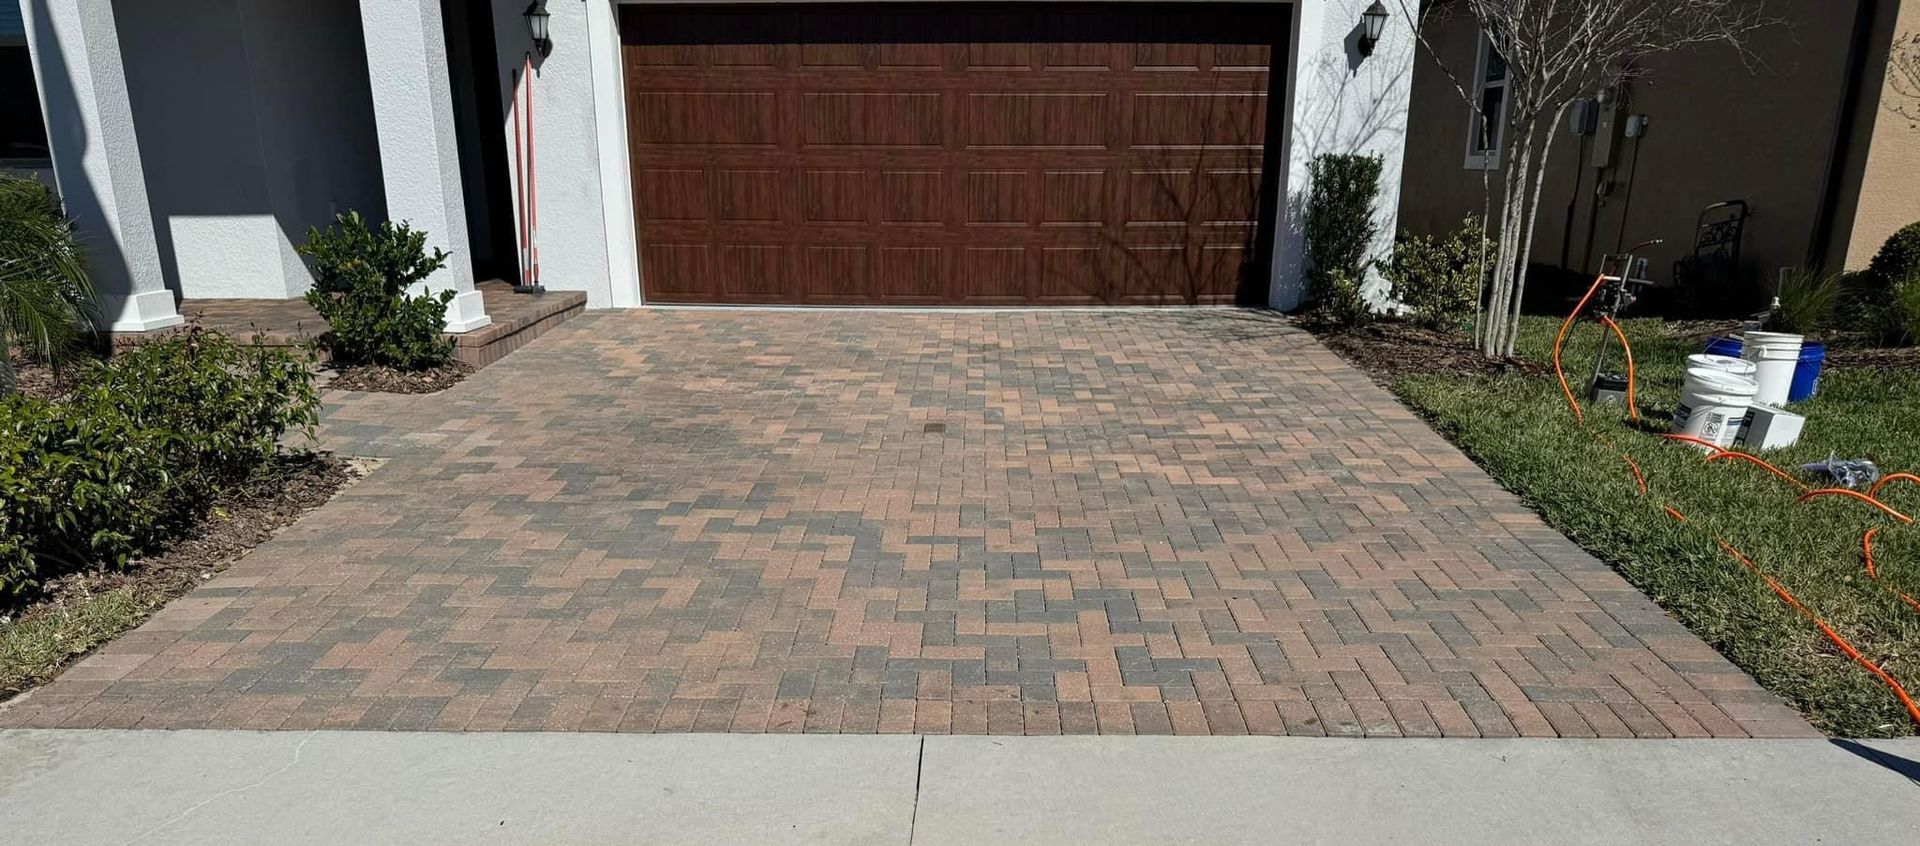 Paver cleaning company in Loomis, CA